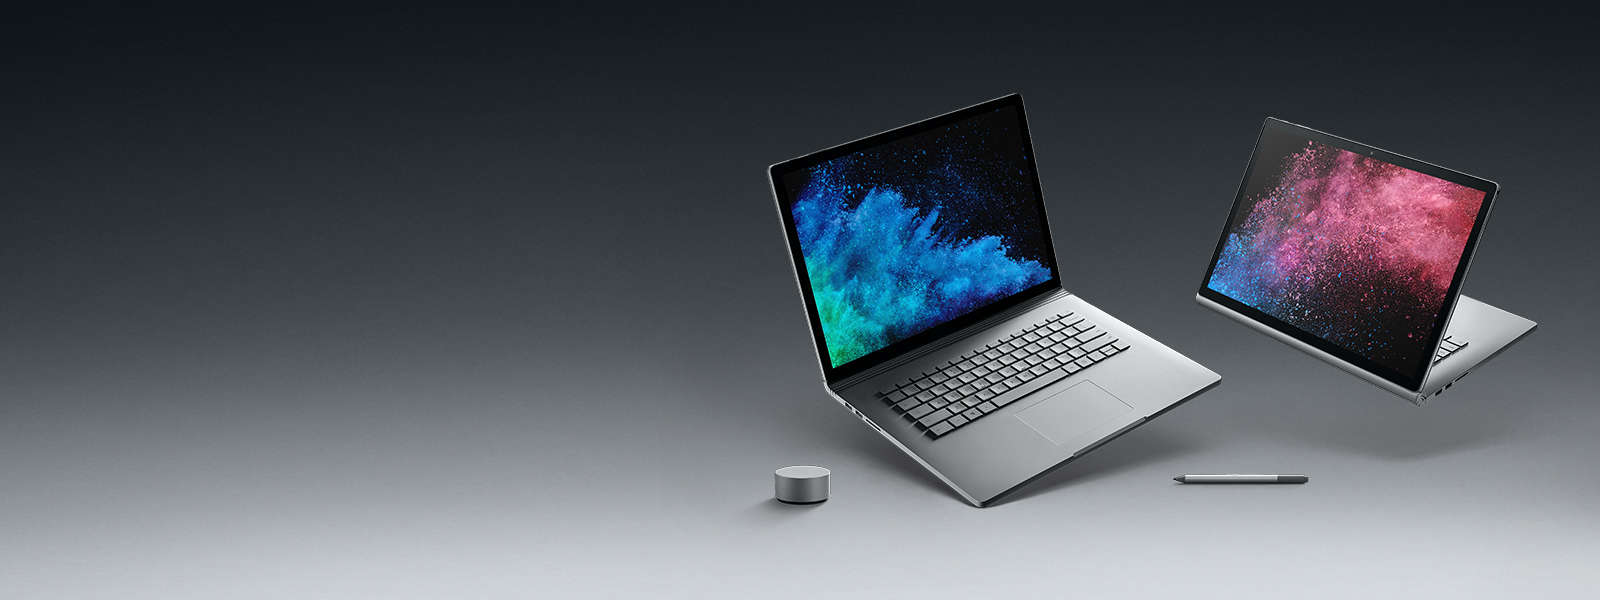 Surface Book、Surface Pro 4 - Microsoft Store 日本